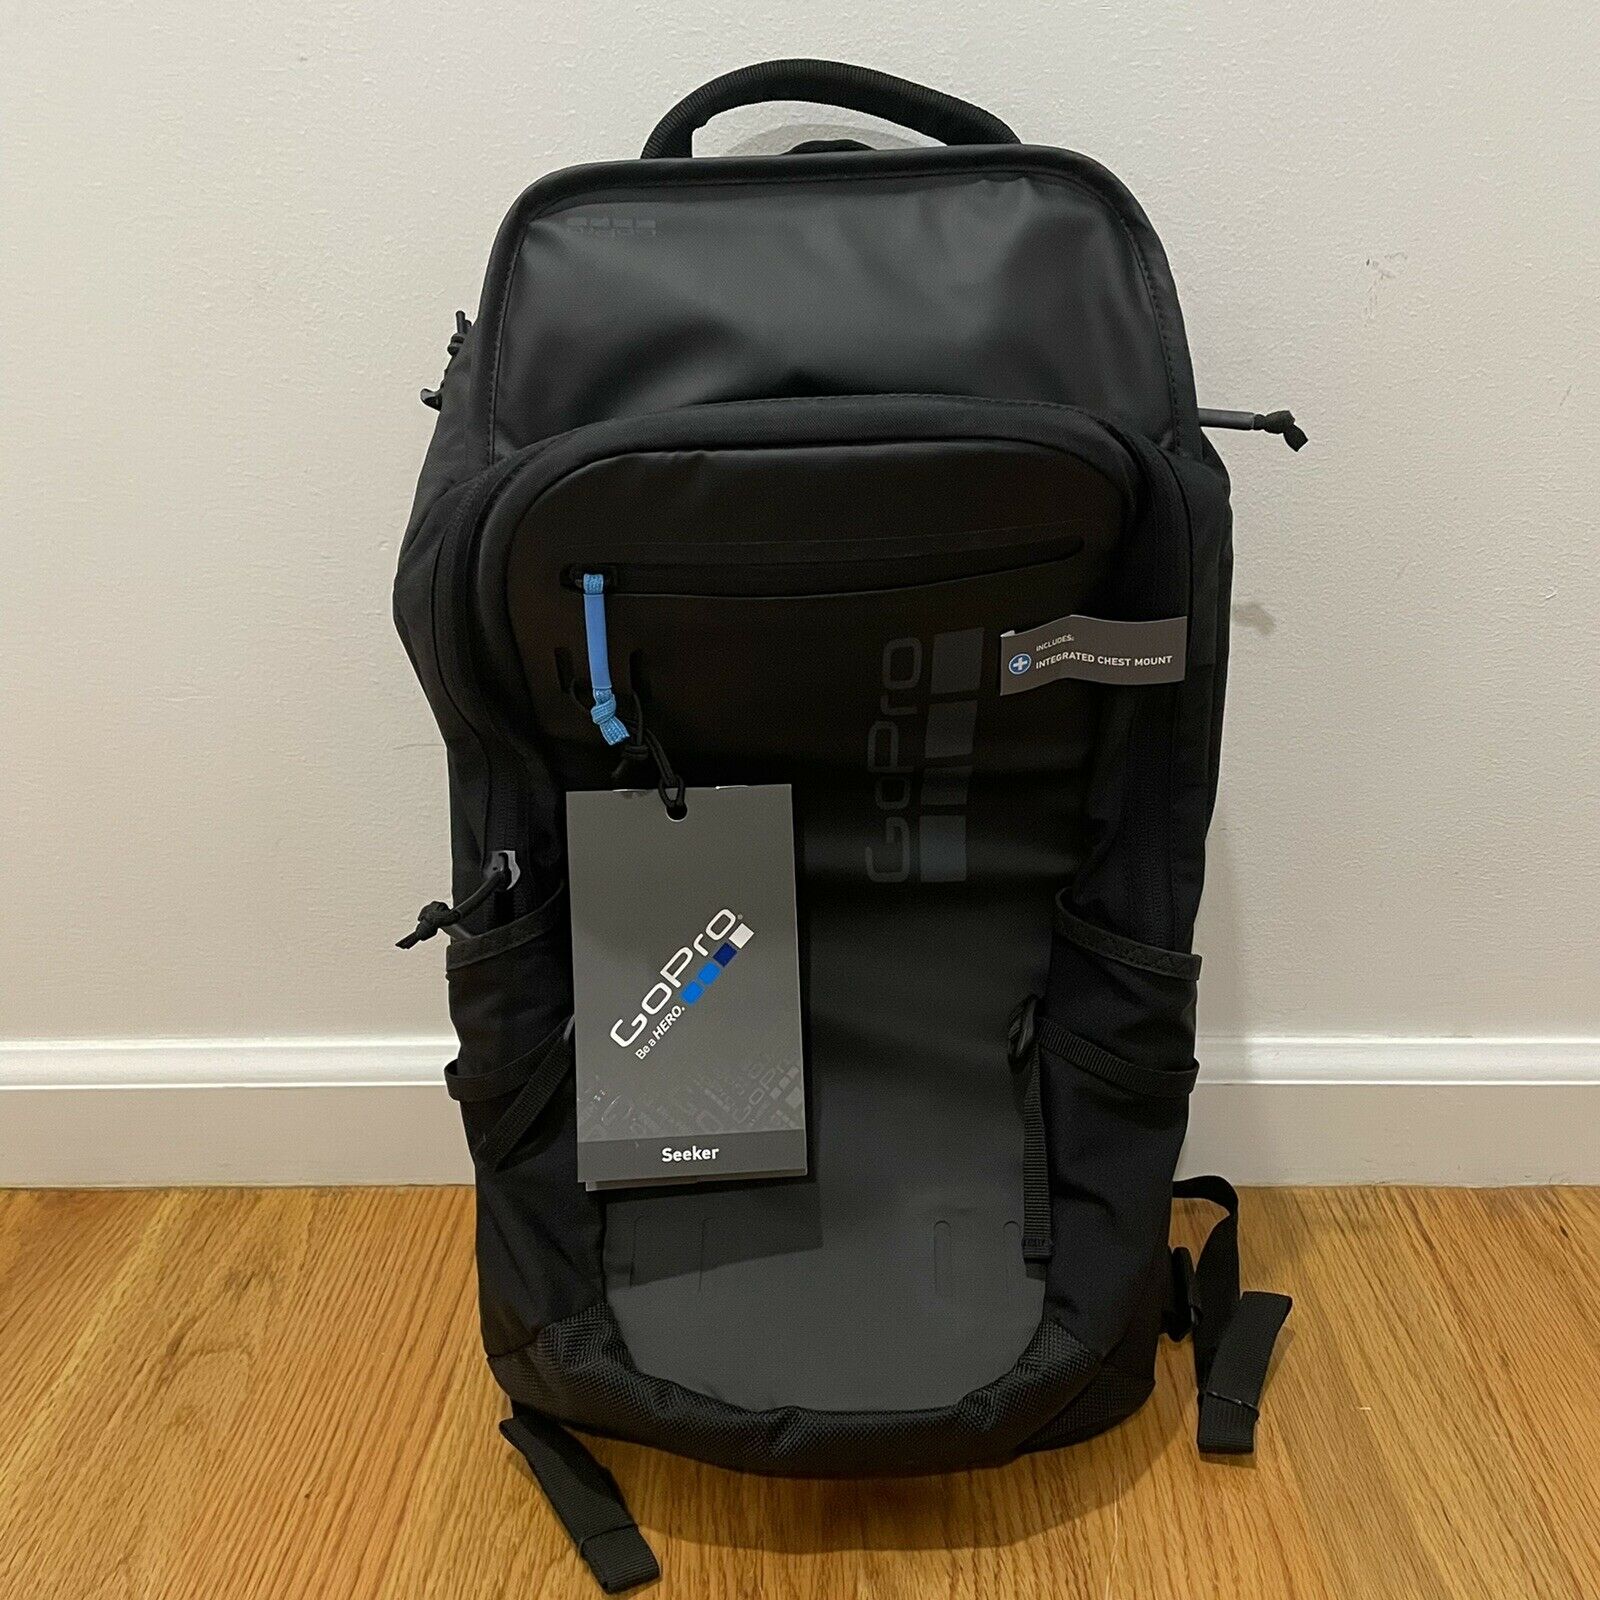 GoPro Seeker Backpack Hydration Black AWOPB-001 with Chest Mount.